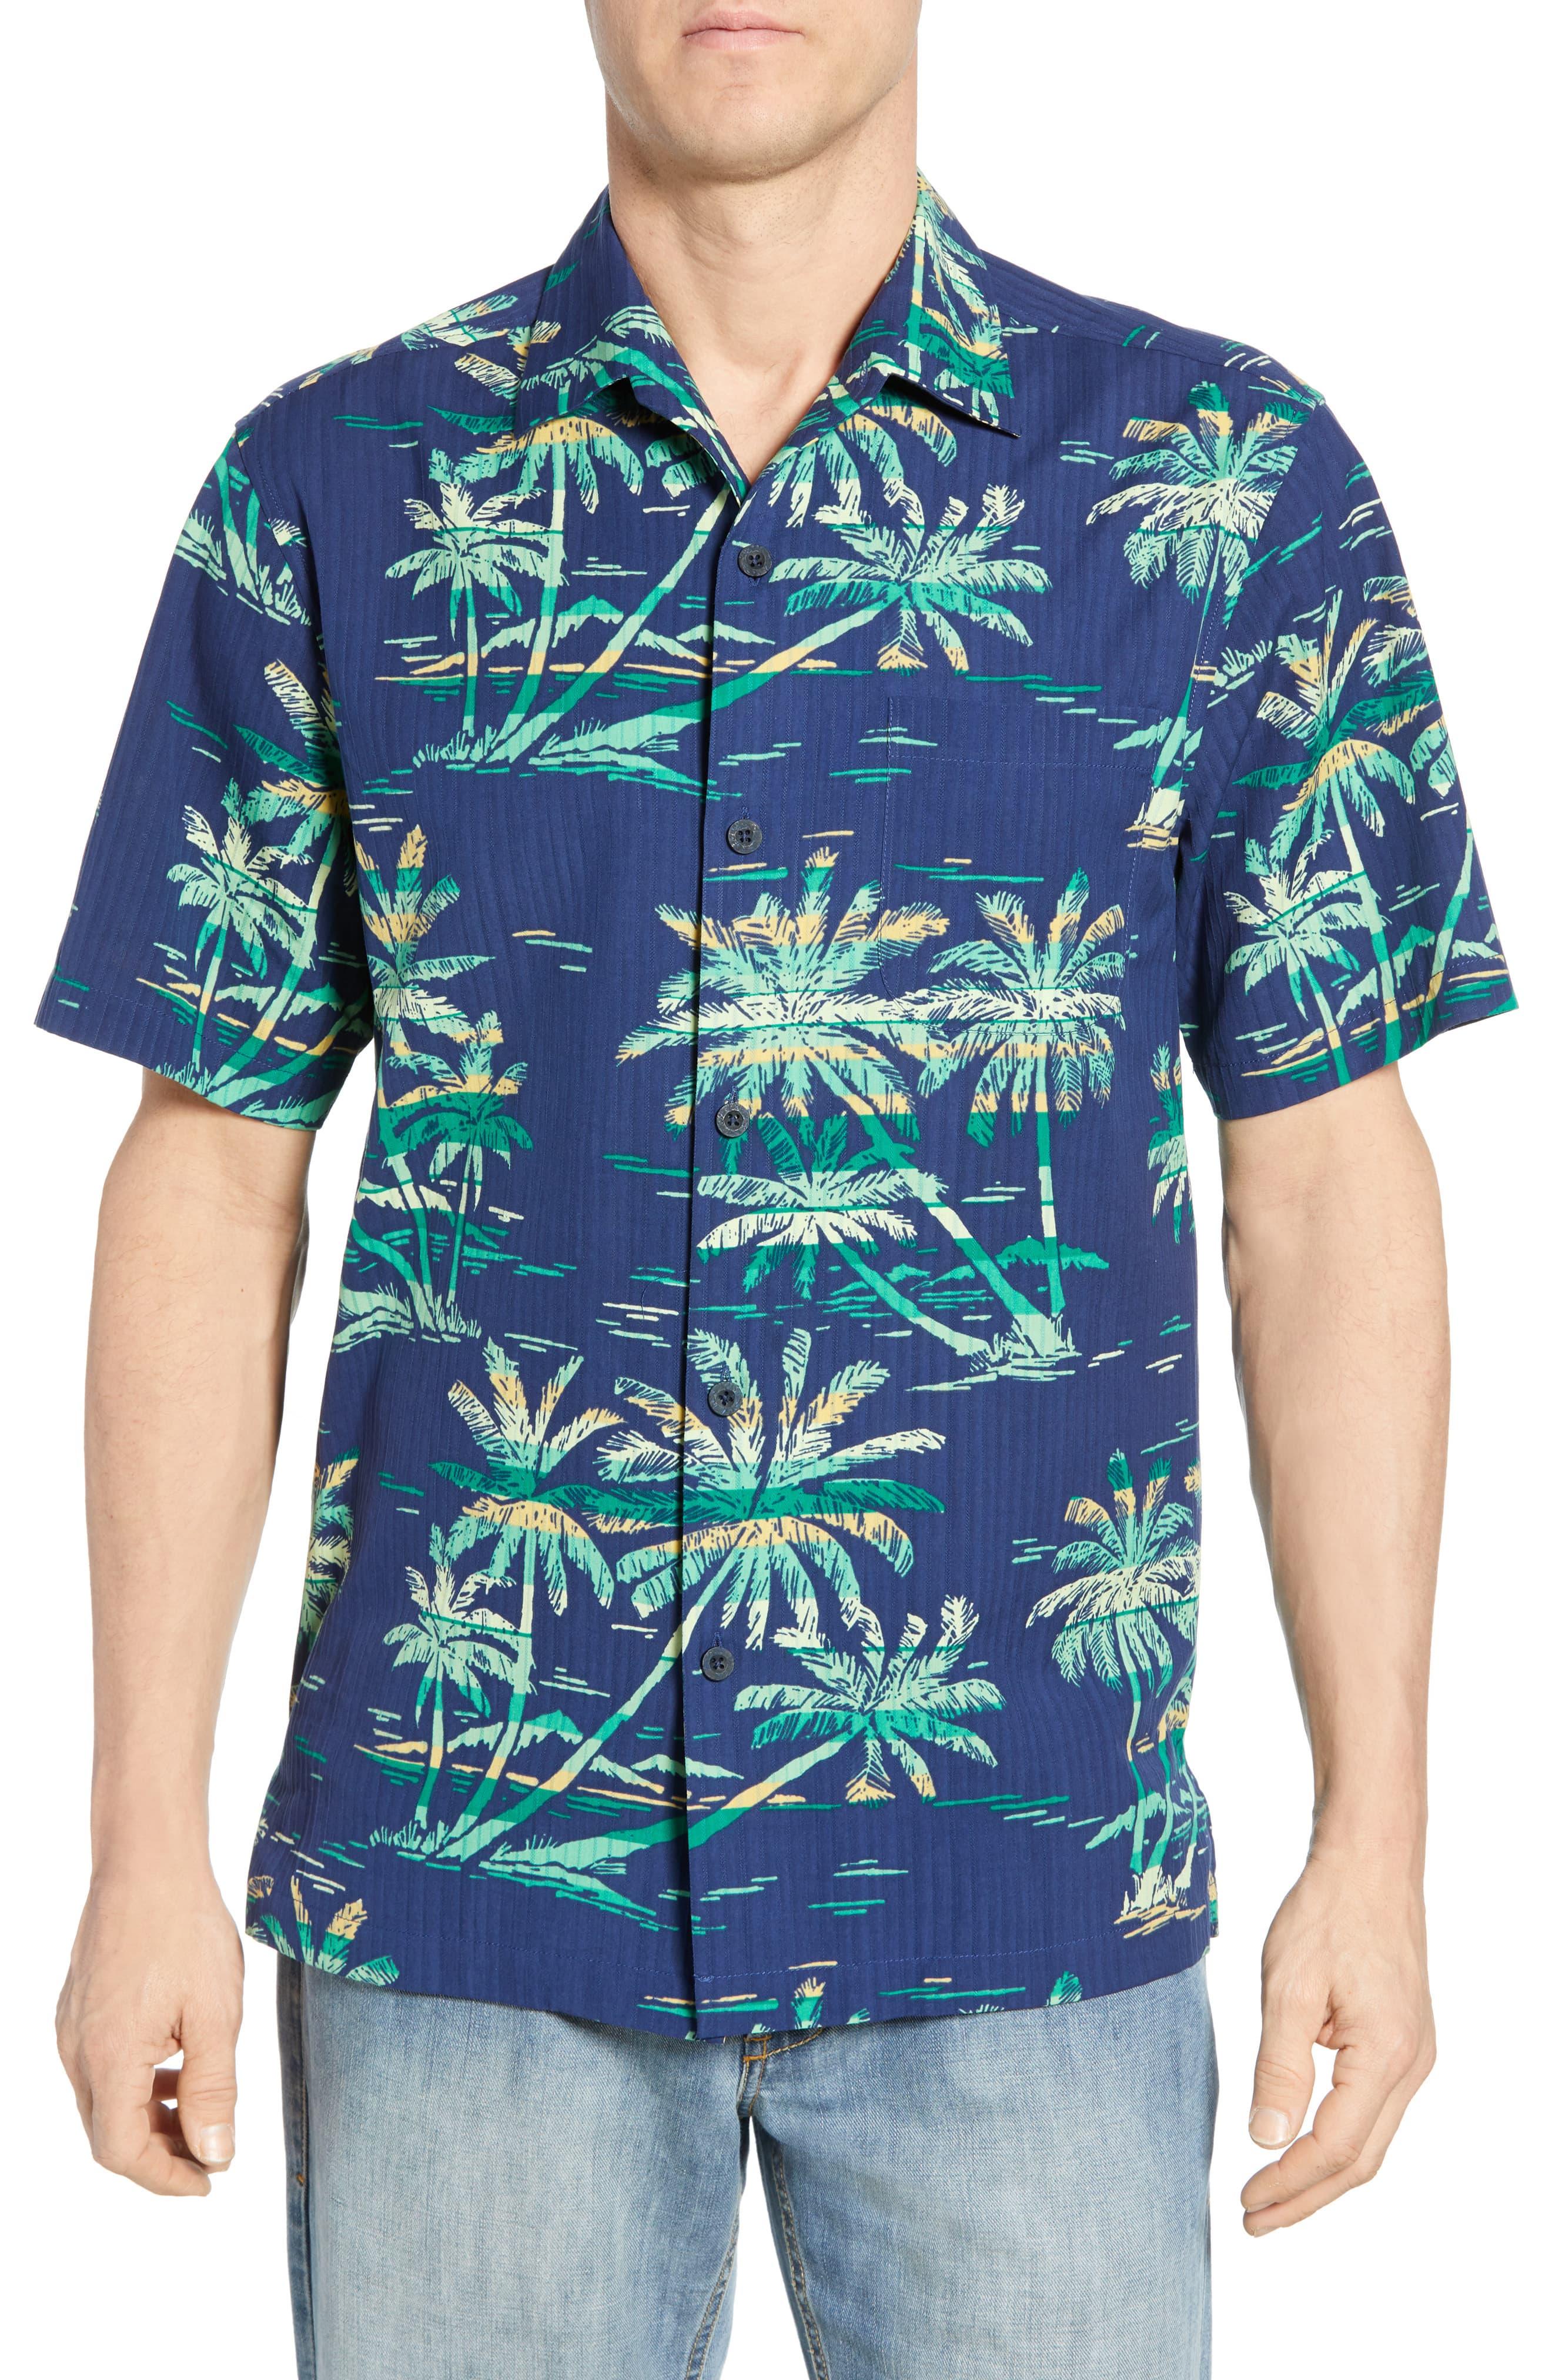 Tommy Bahama Island Groove Classic Fit Sport Shirt in Blue for Men - Lyst